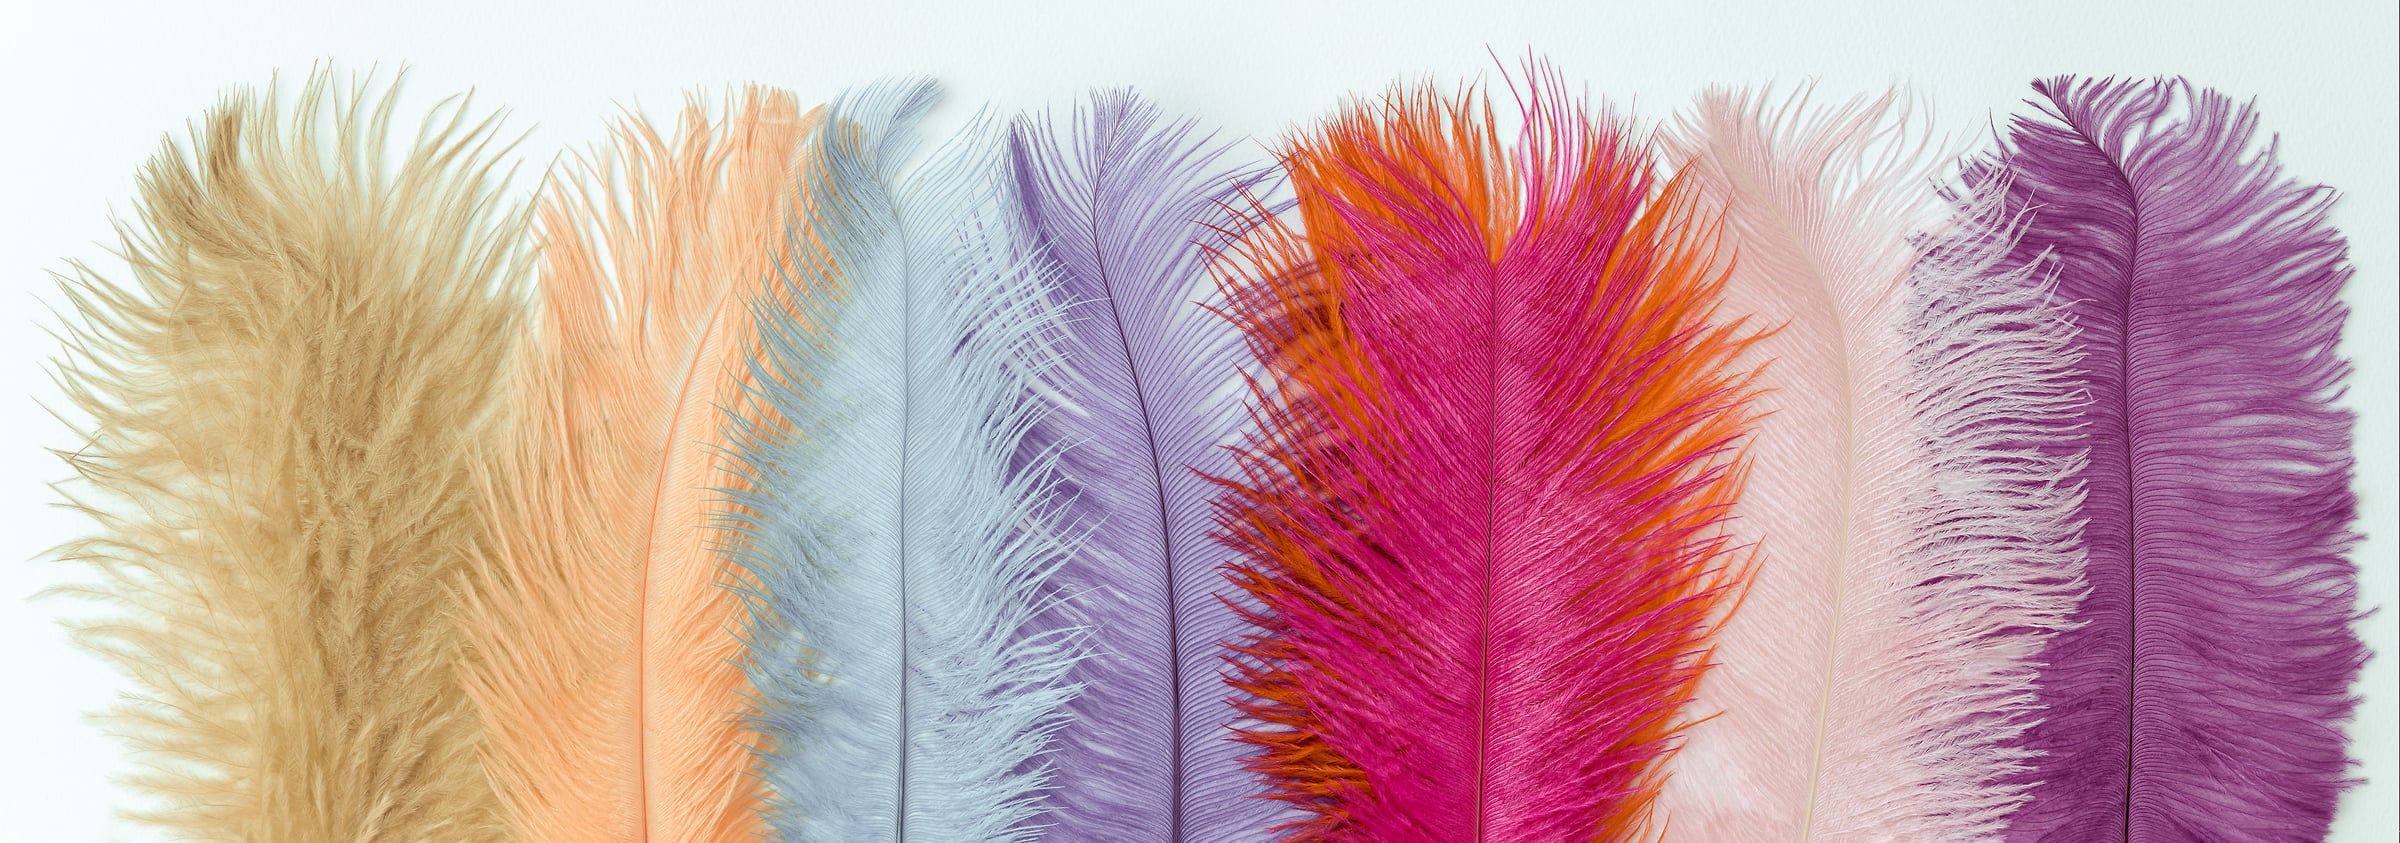 925 megapixels! A very high resolution, large-format VAST photo print of pastel-colored feathers on a white background; macro photograph created by Assaf Frank.